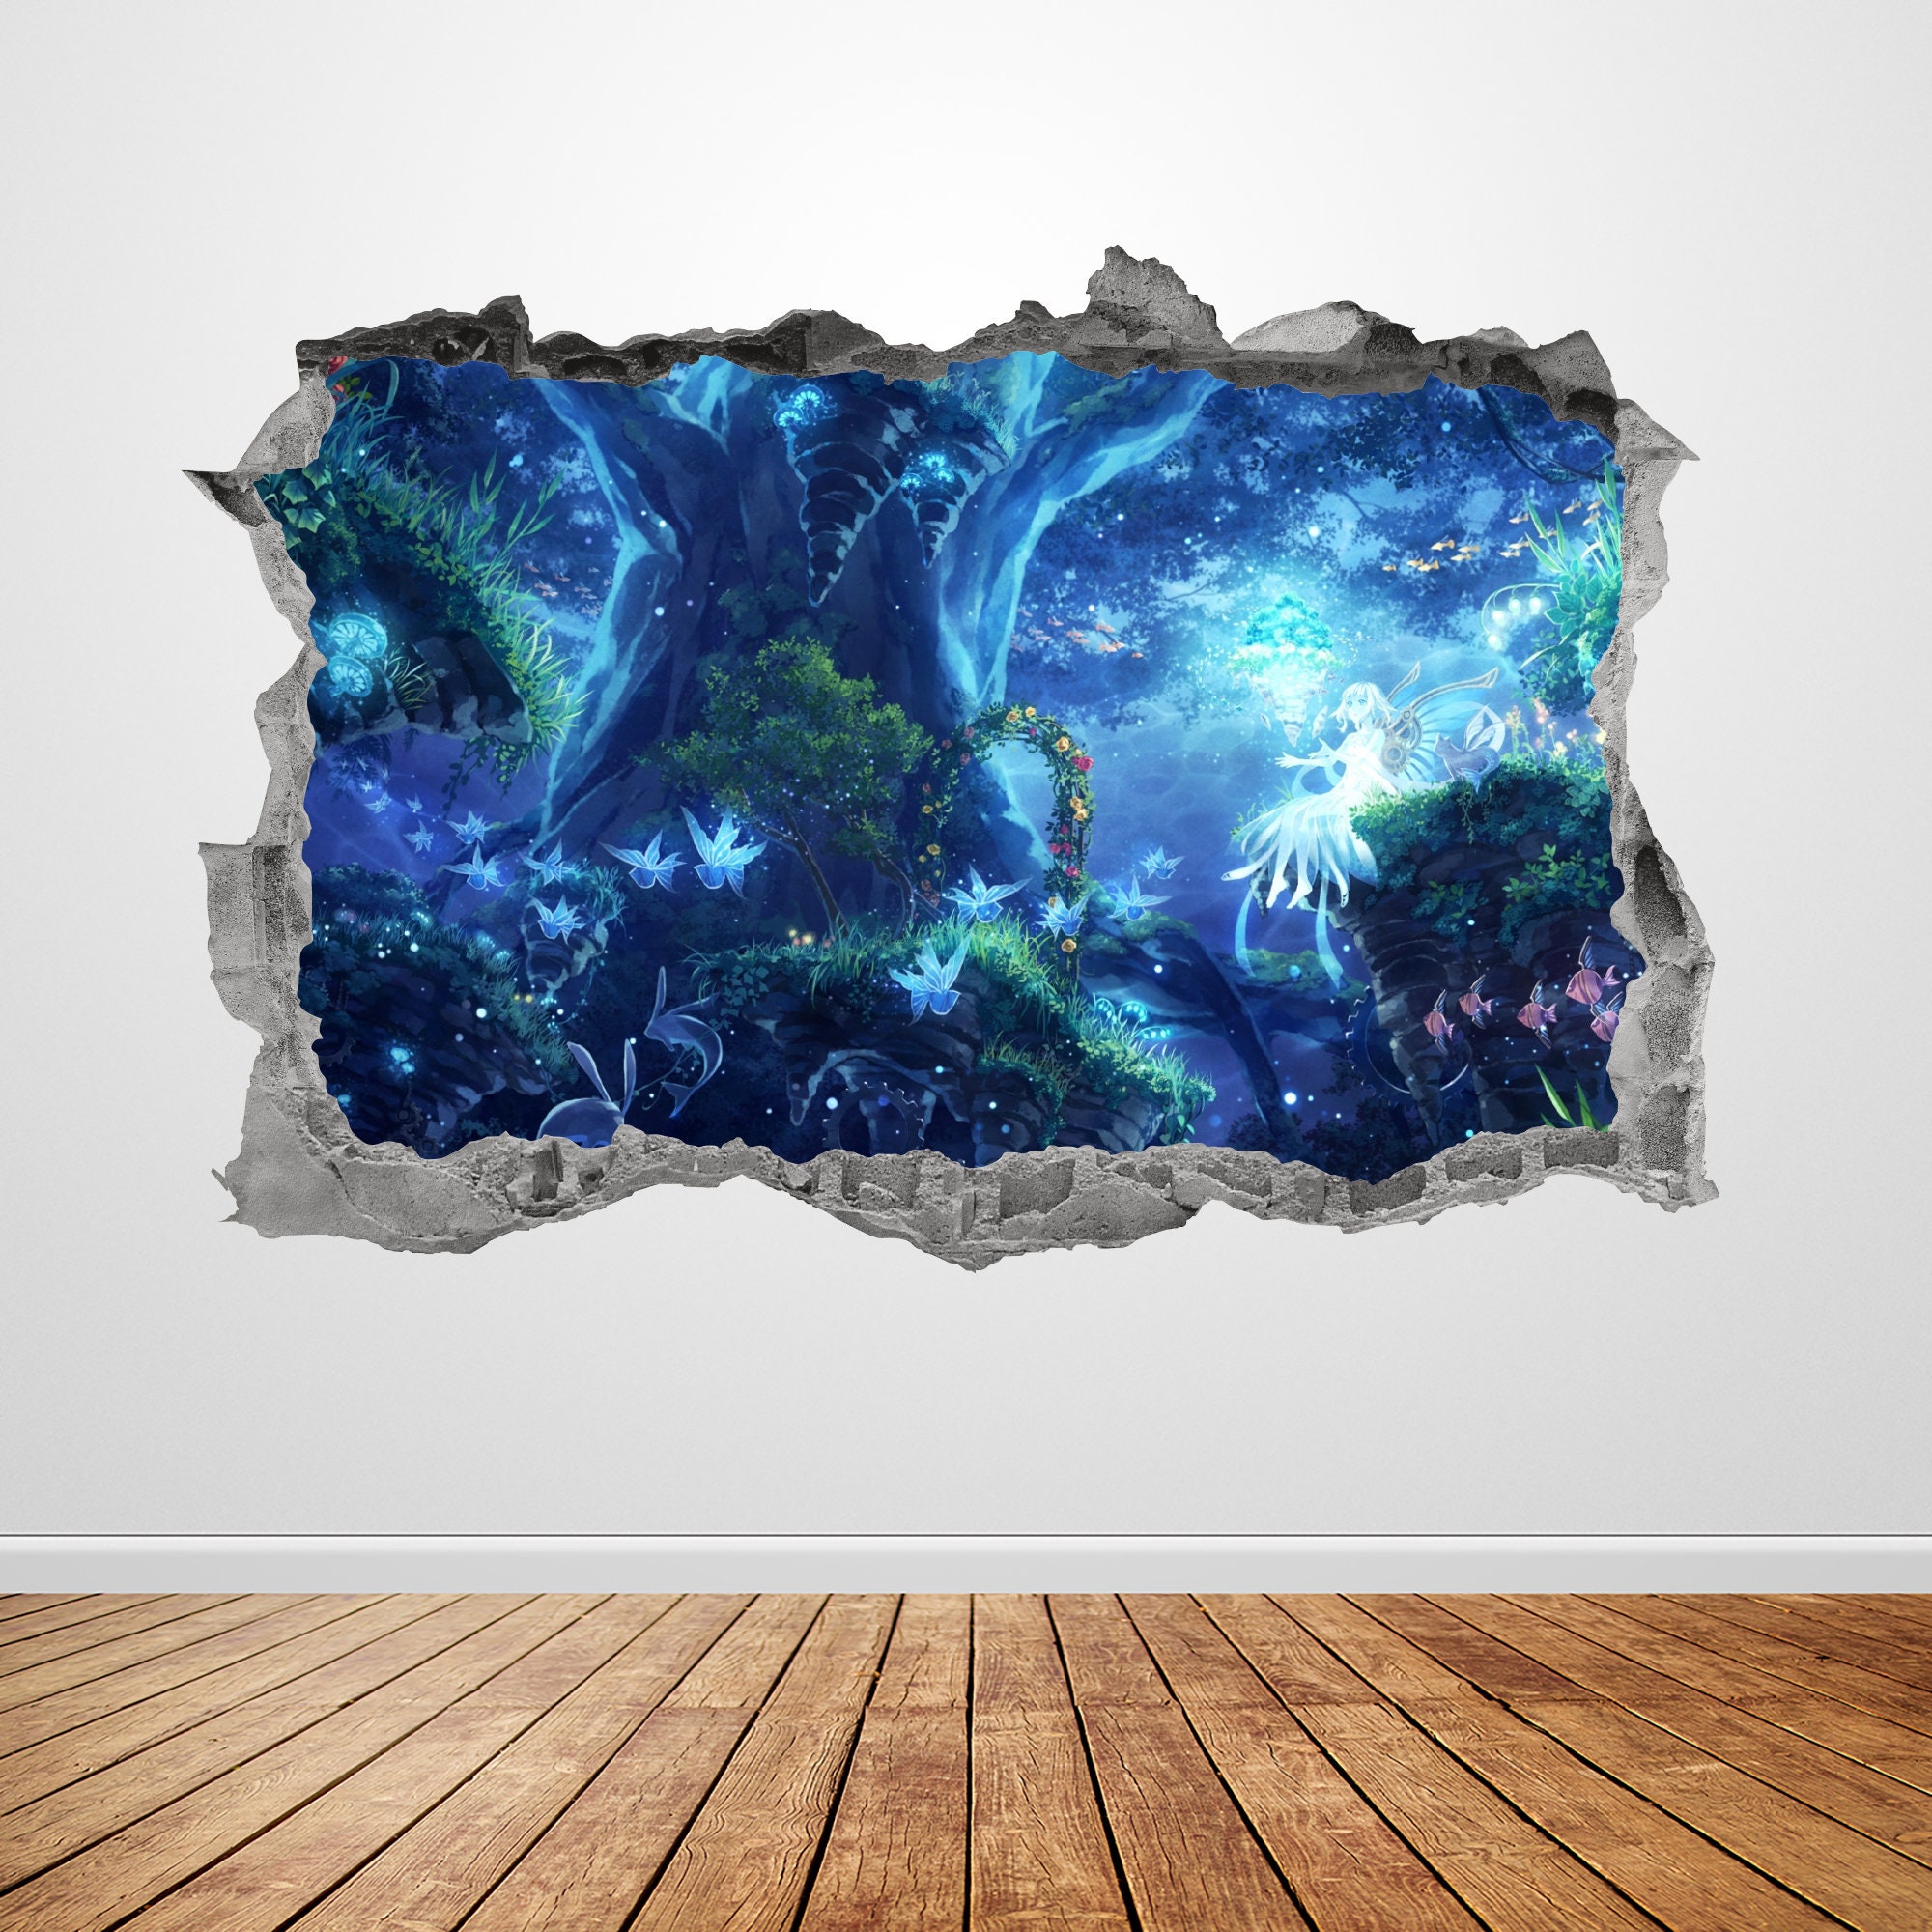 Waterfall Enchanted Forest Trees 3D Smashed Wall Sticker Decal Art Mural J1229 